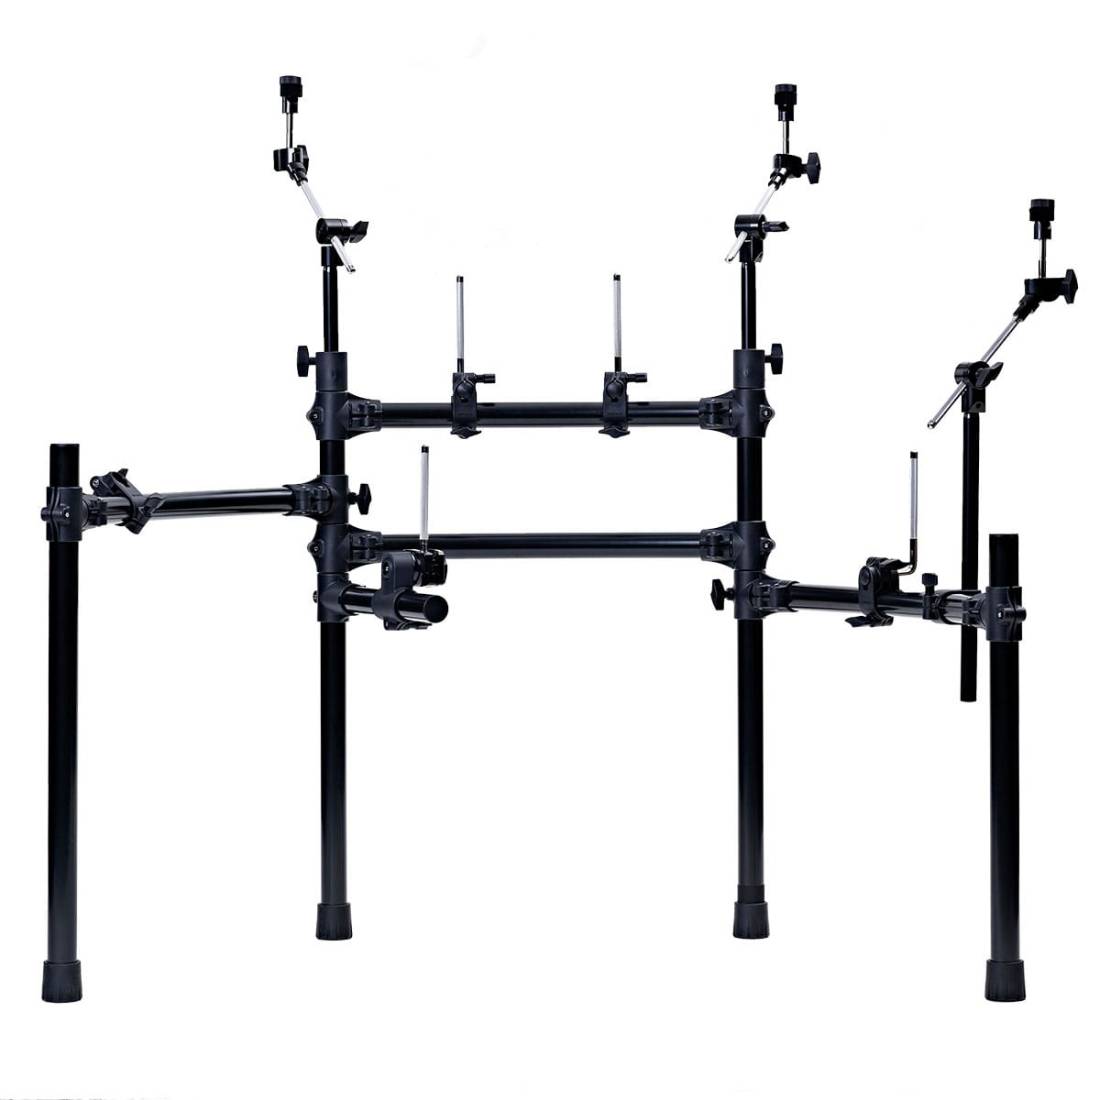 MDS-Standard Mounting Rack for TD-25 Electronic Drum Kit